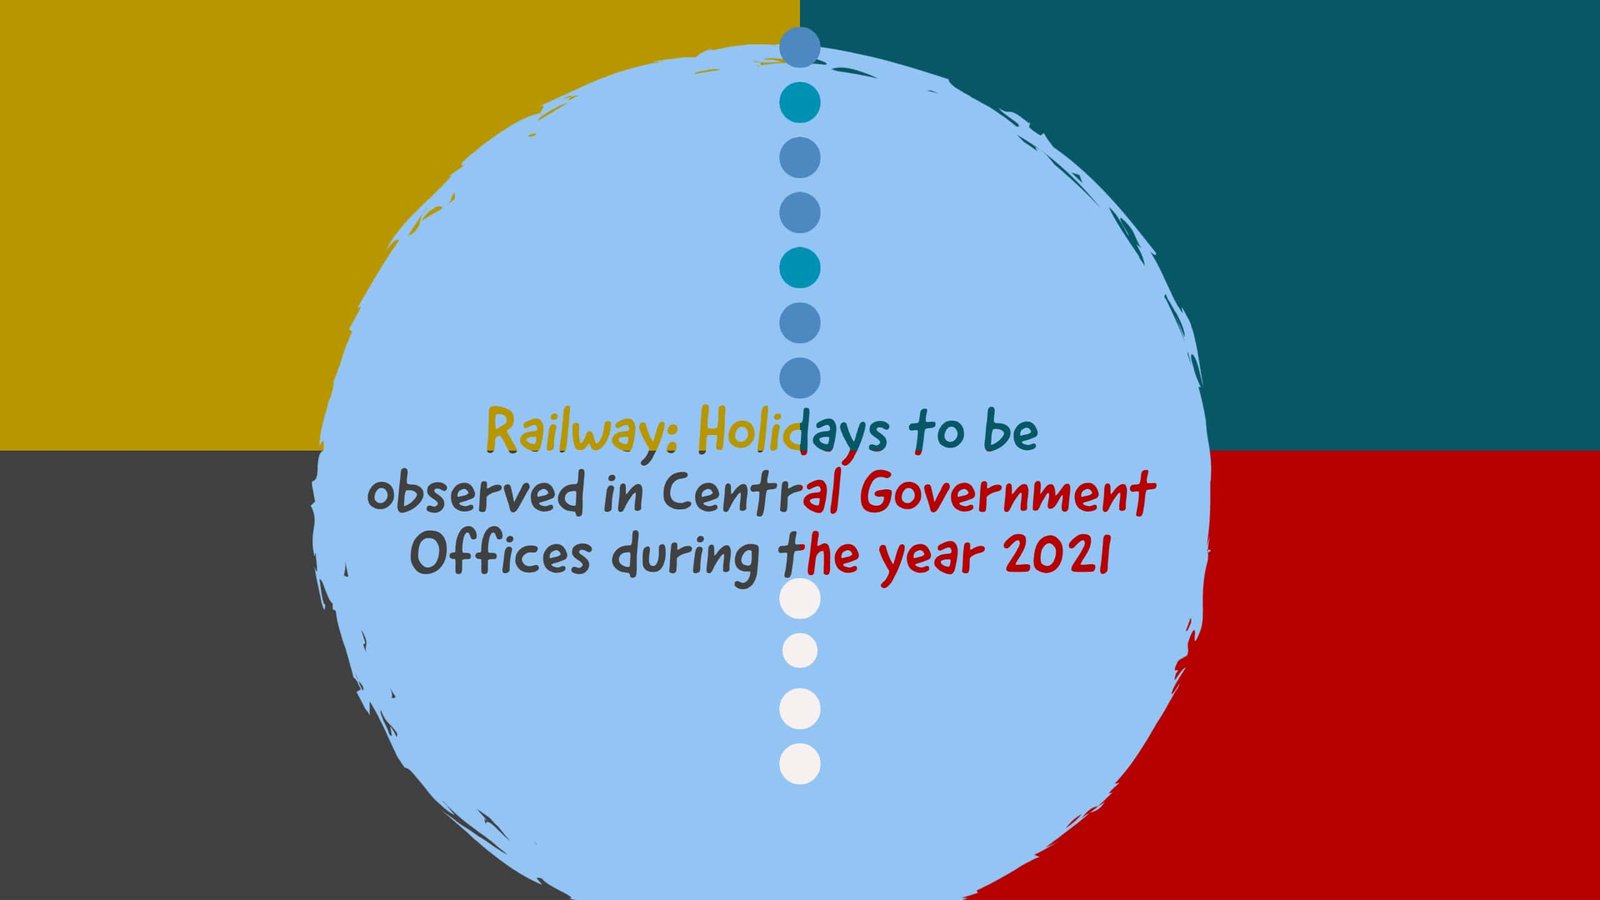 Railway Holidays to be observed in Central Government Offices during the year 2021